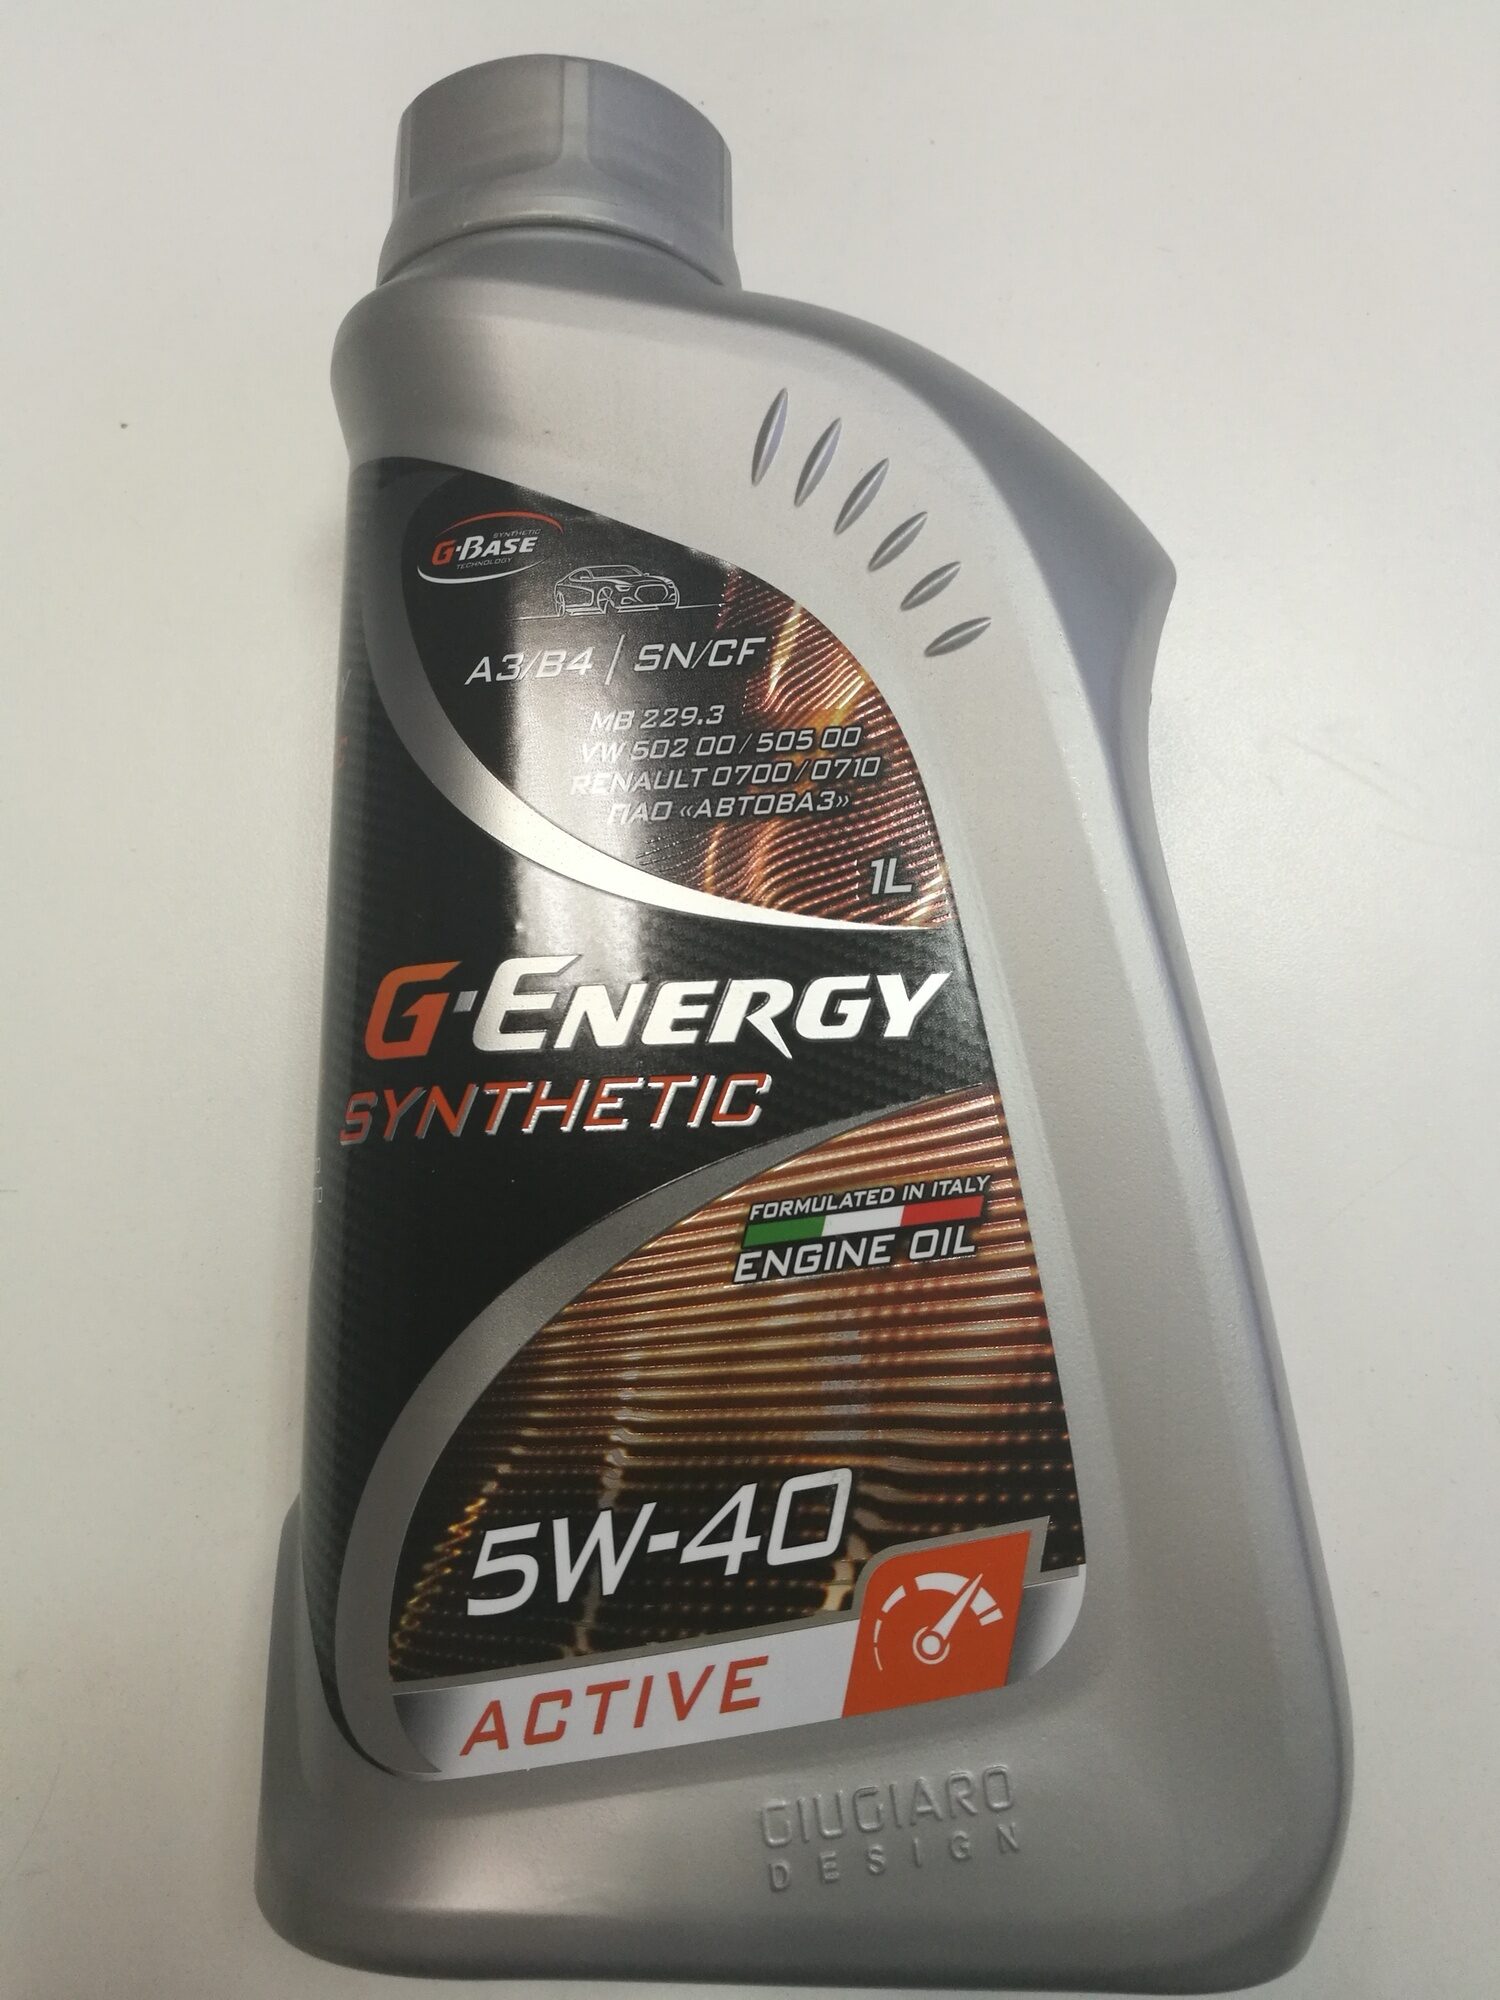 G-Energy Synthetic Active 5w-40. Масло моторное g-Energy SYNTHETICACTIVE 5w40 1л. G-Energy Synthetic Active 5w-40 синтетическое 1 л (артикул 253142409). Лукойл Джи Энерджи 5w40. Energy synthetic active 5w40